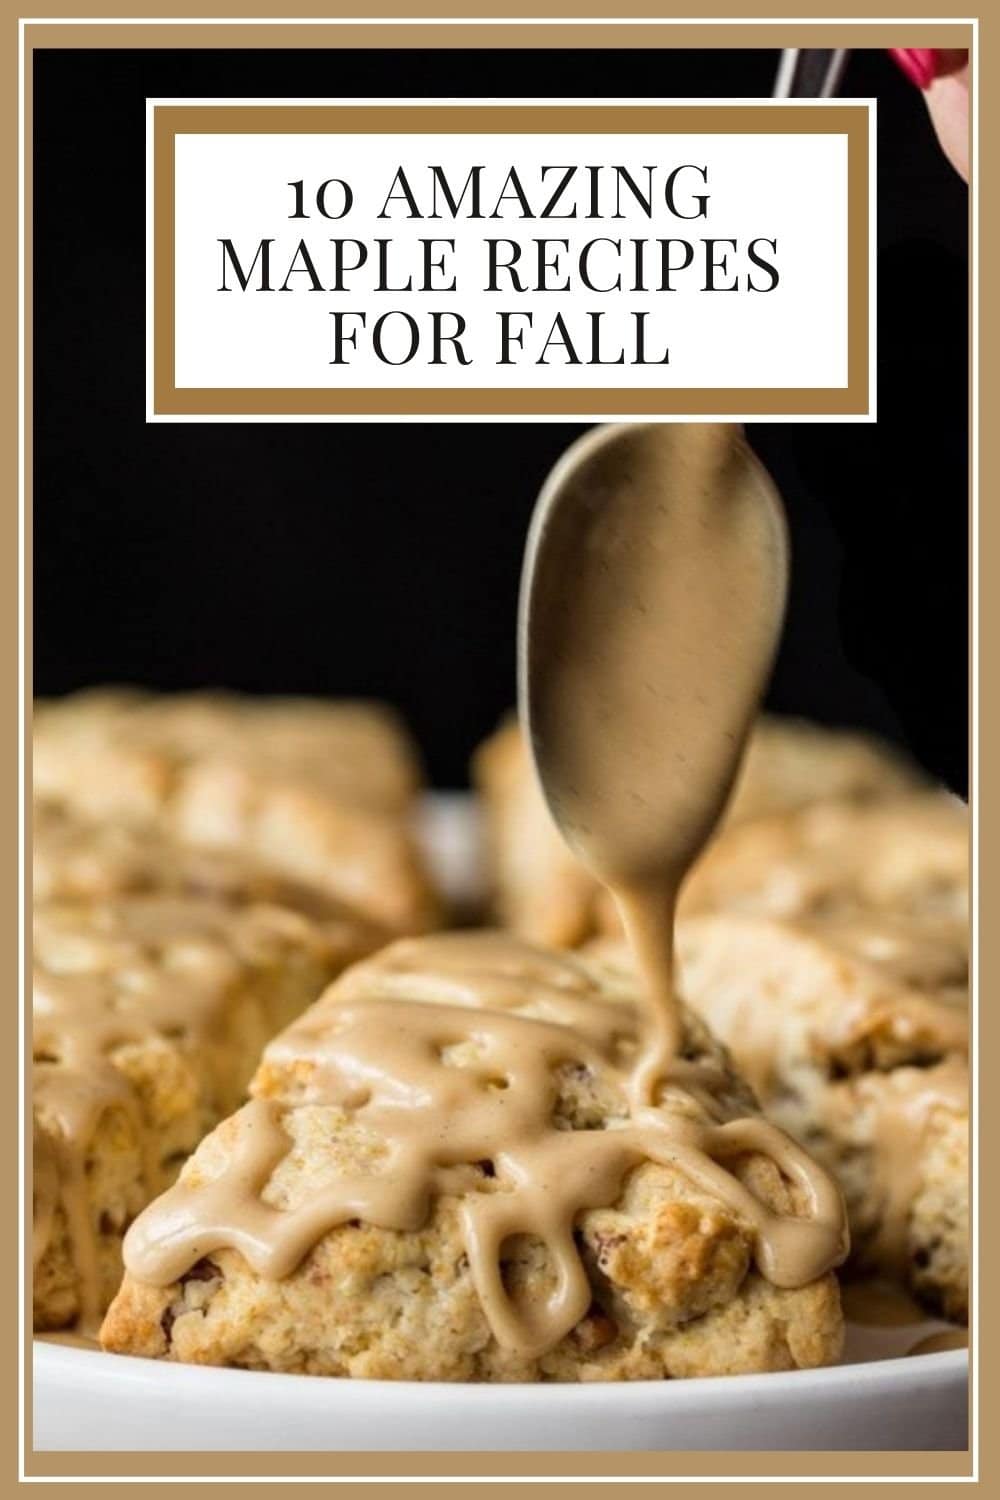 Marvelous Maple! Sweet and Savory Recipes Everyone Will Enjoy!